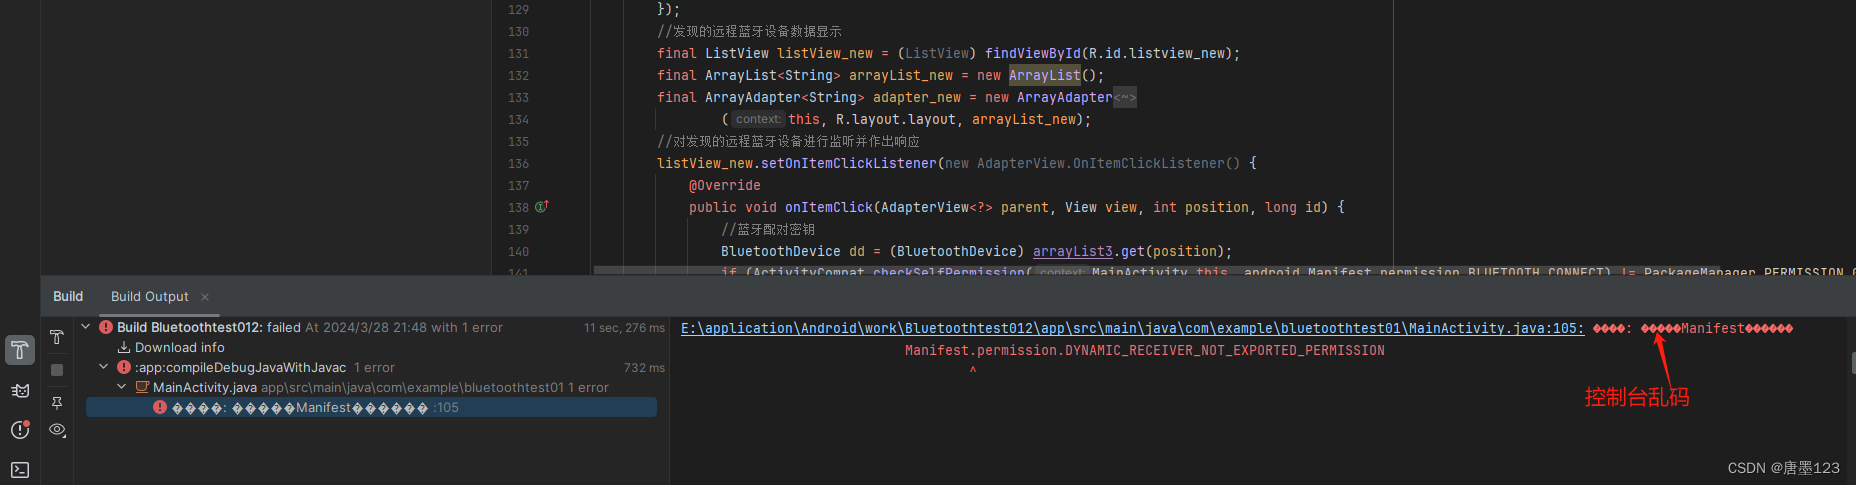 Android Studio<span style='color:red;'>控制台</span>输出<span style='color:red;'>中文</span><span style='color:red;'>乱</span><span style='color:red;'>码</span><span style='color:red;'>问题</span>